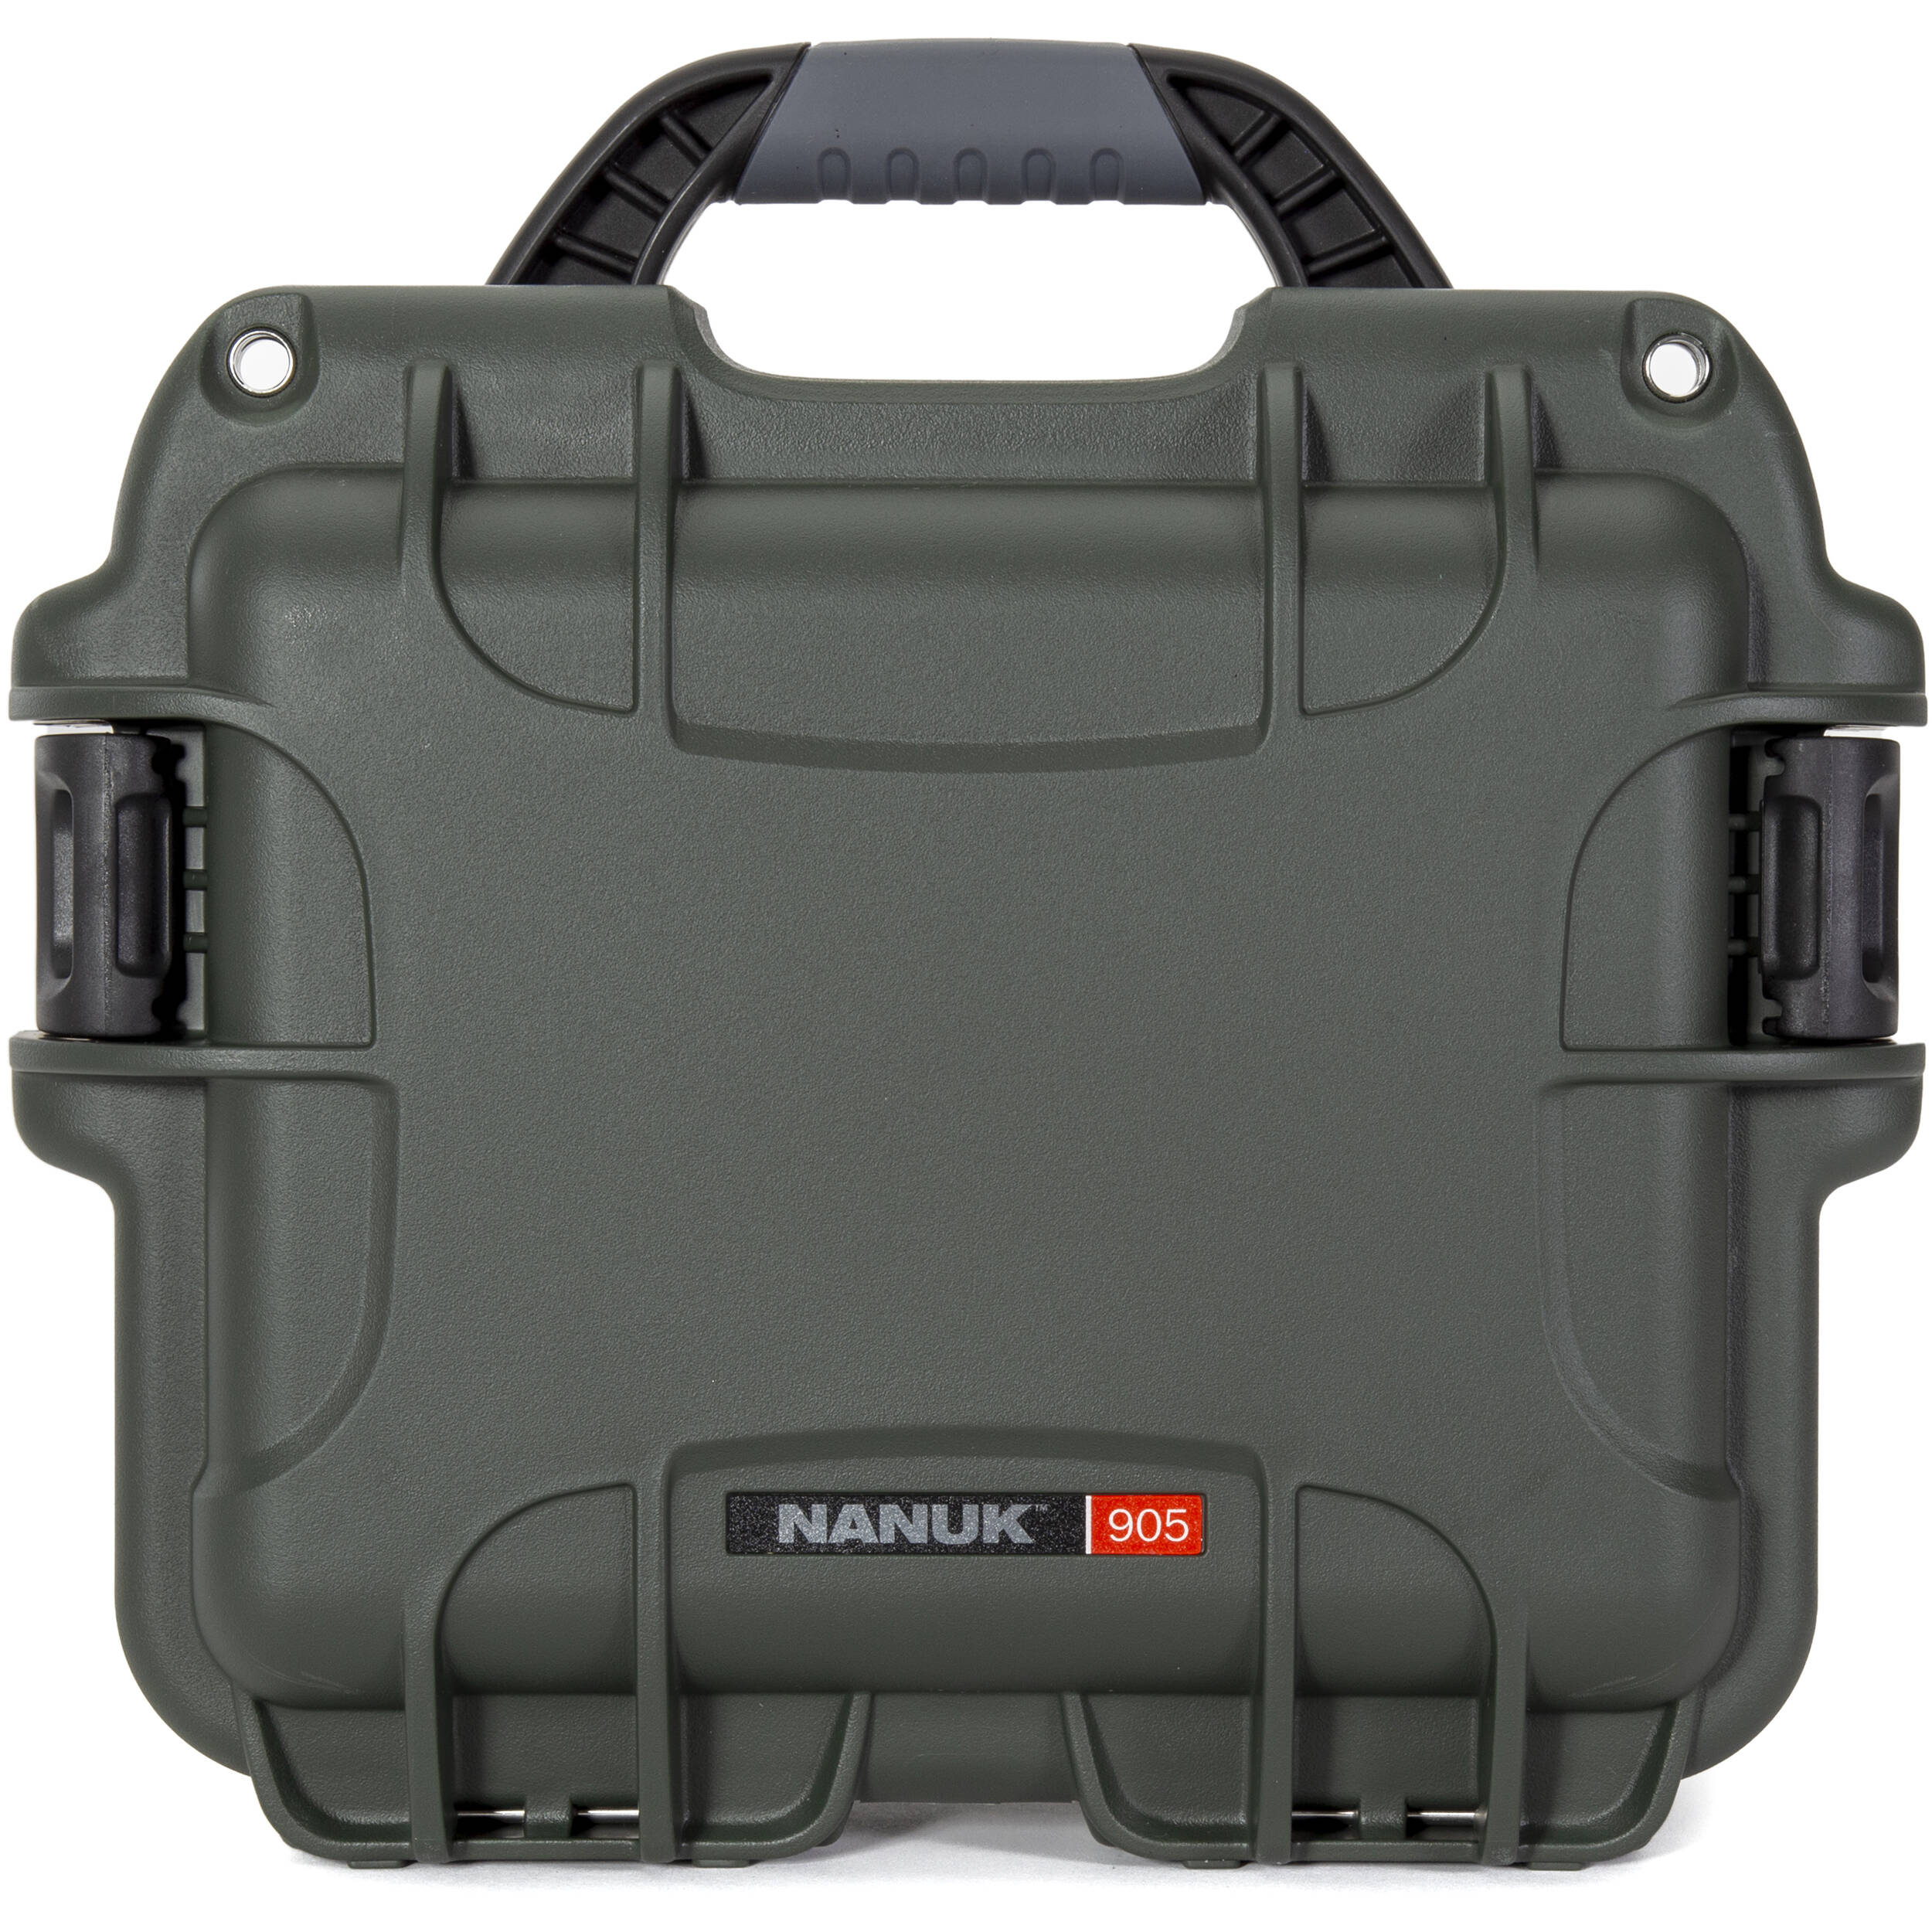 Nanuk 905 Waterproof Hard Case Pro Photo/Video Kit with Padded Dividers and Lid Organizer (Olive)